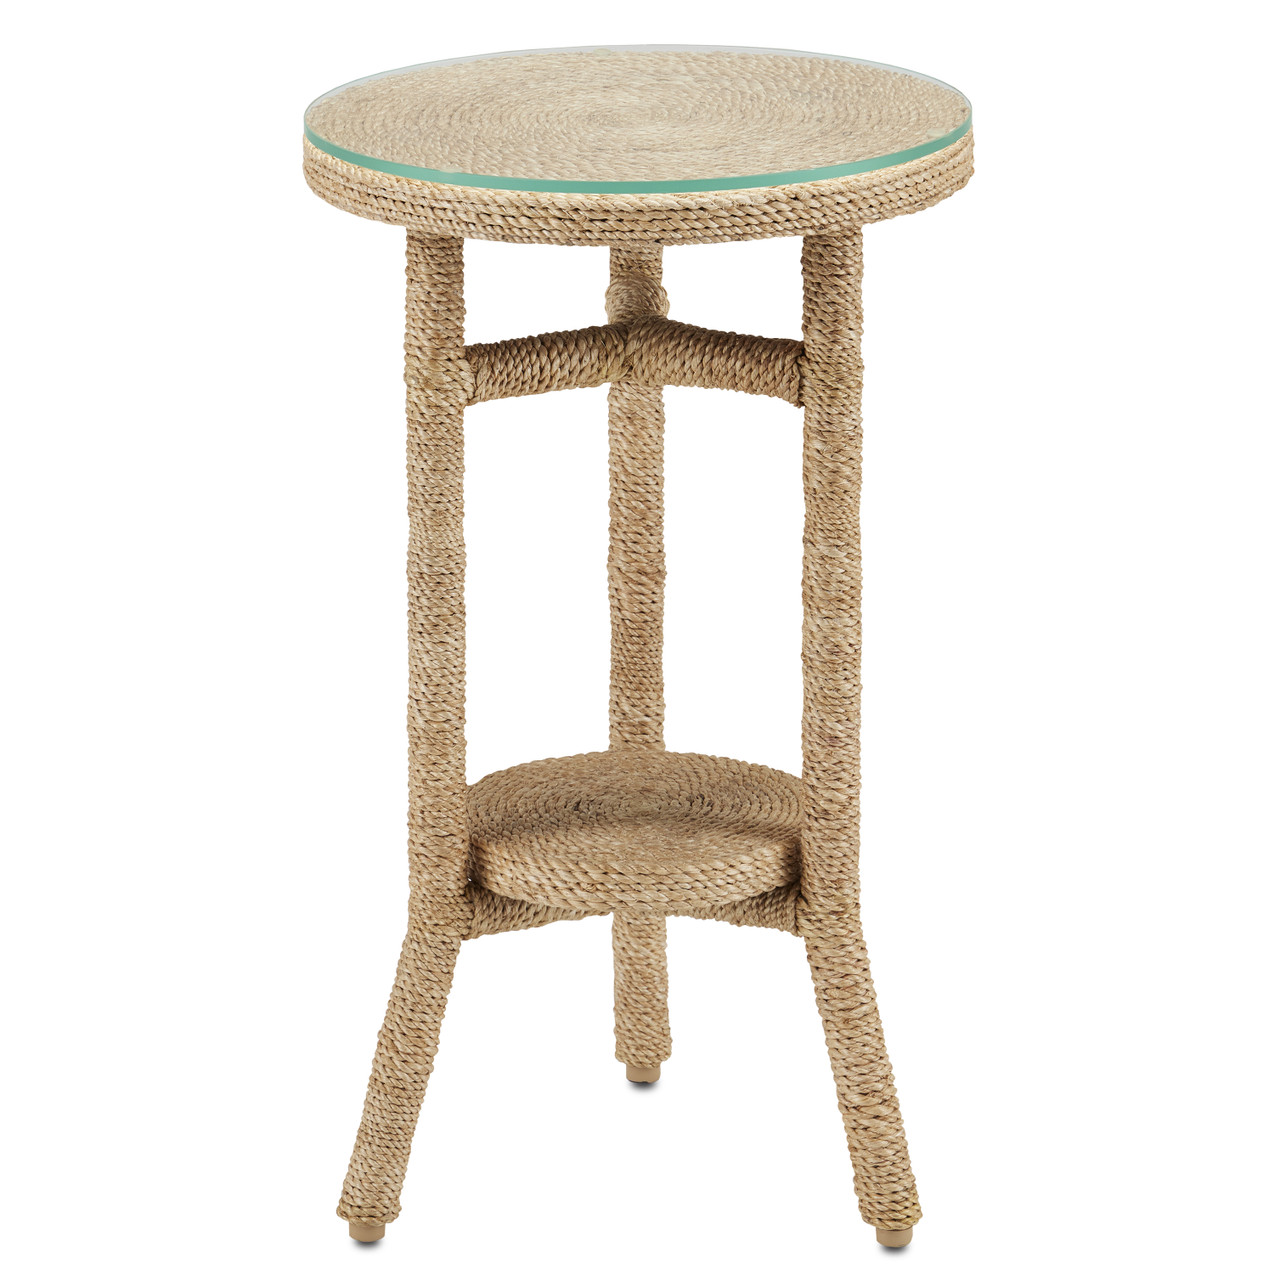 Image of Rio Limay Rope Wrapped Drinks Table